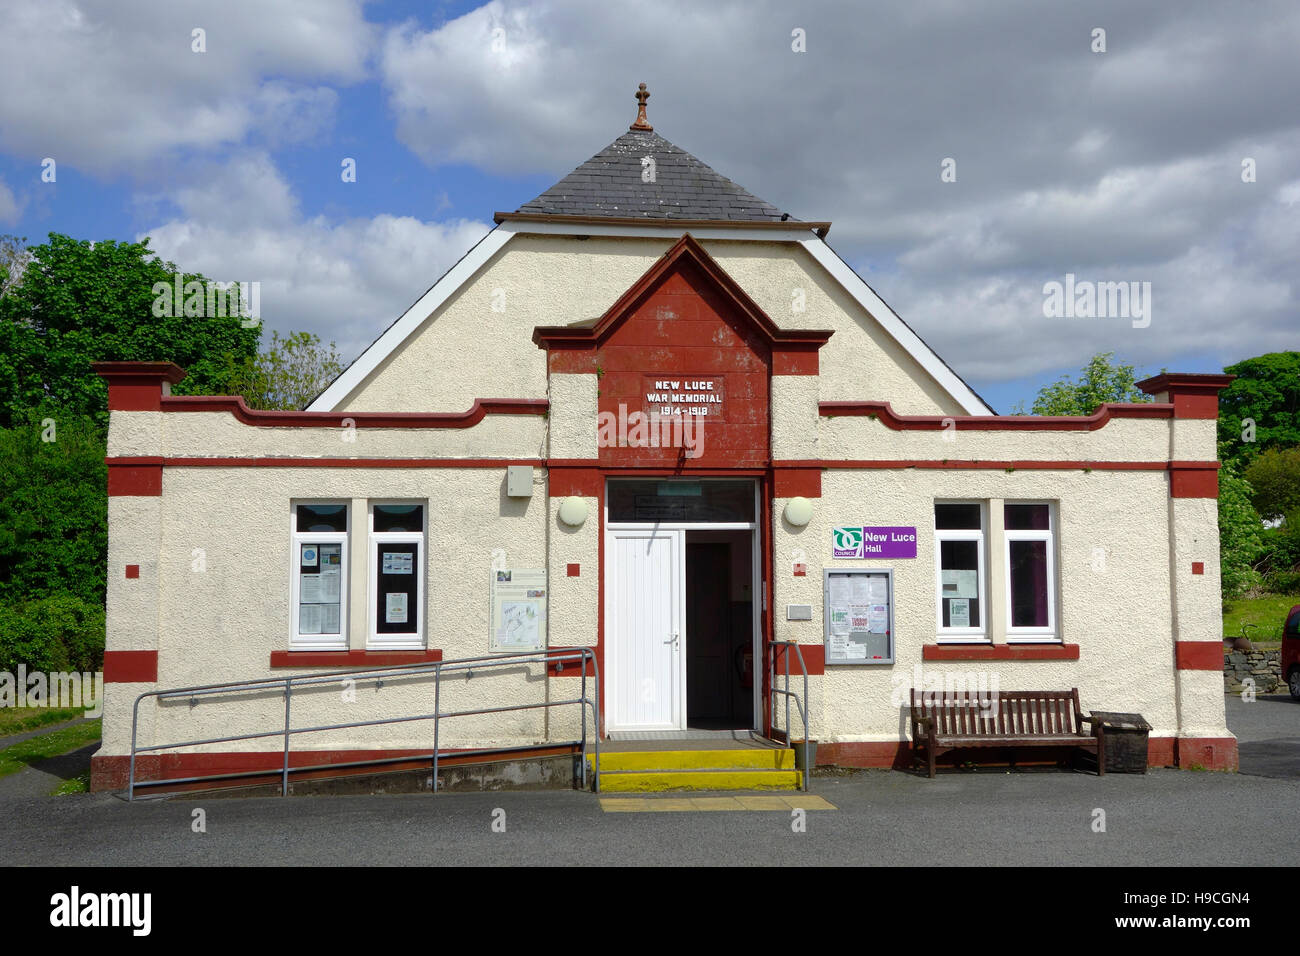 New Luce Village Hall, Wigtownshire, Dumfries and Galloway, Scotland, UK Stock Photo